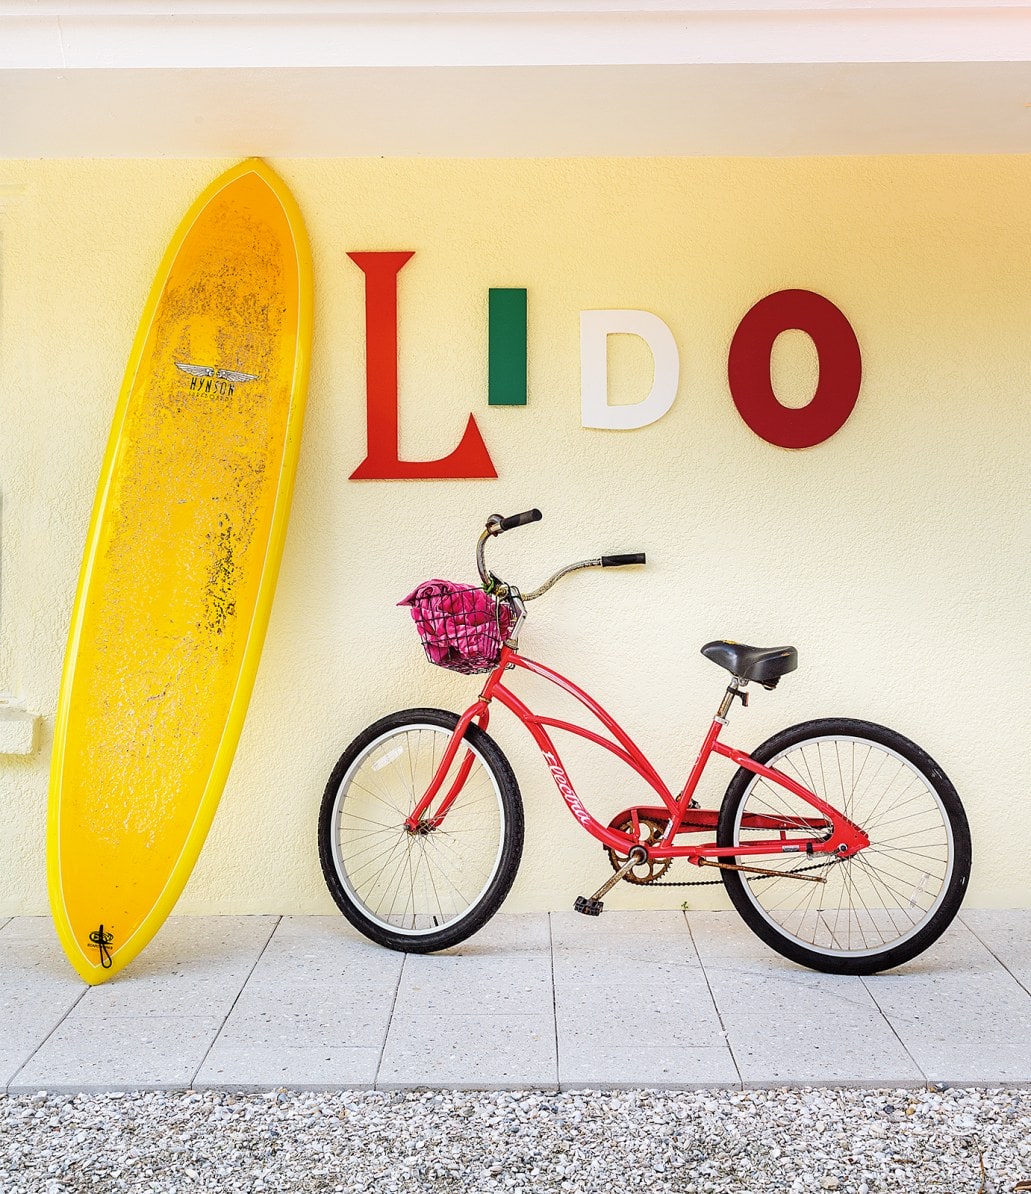 Outside area with decorative bike, surfboard and letters 